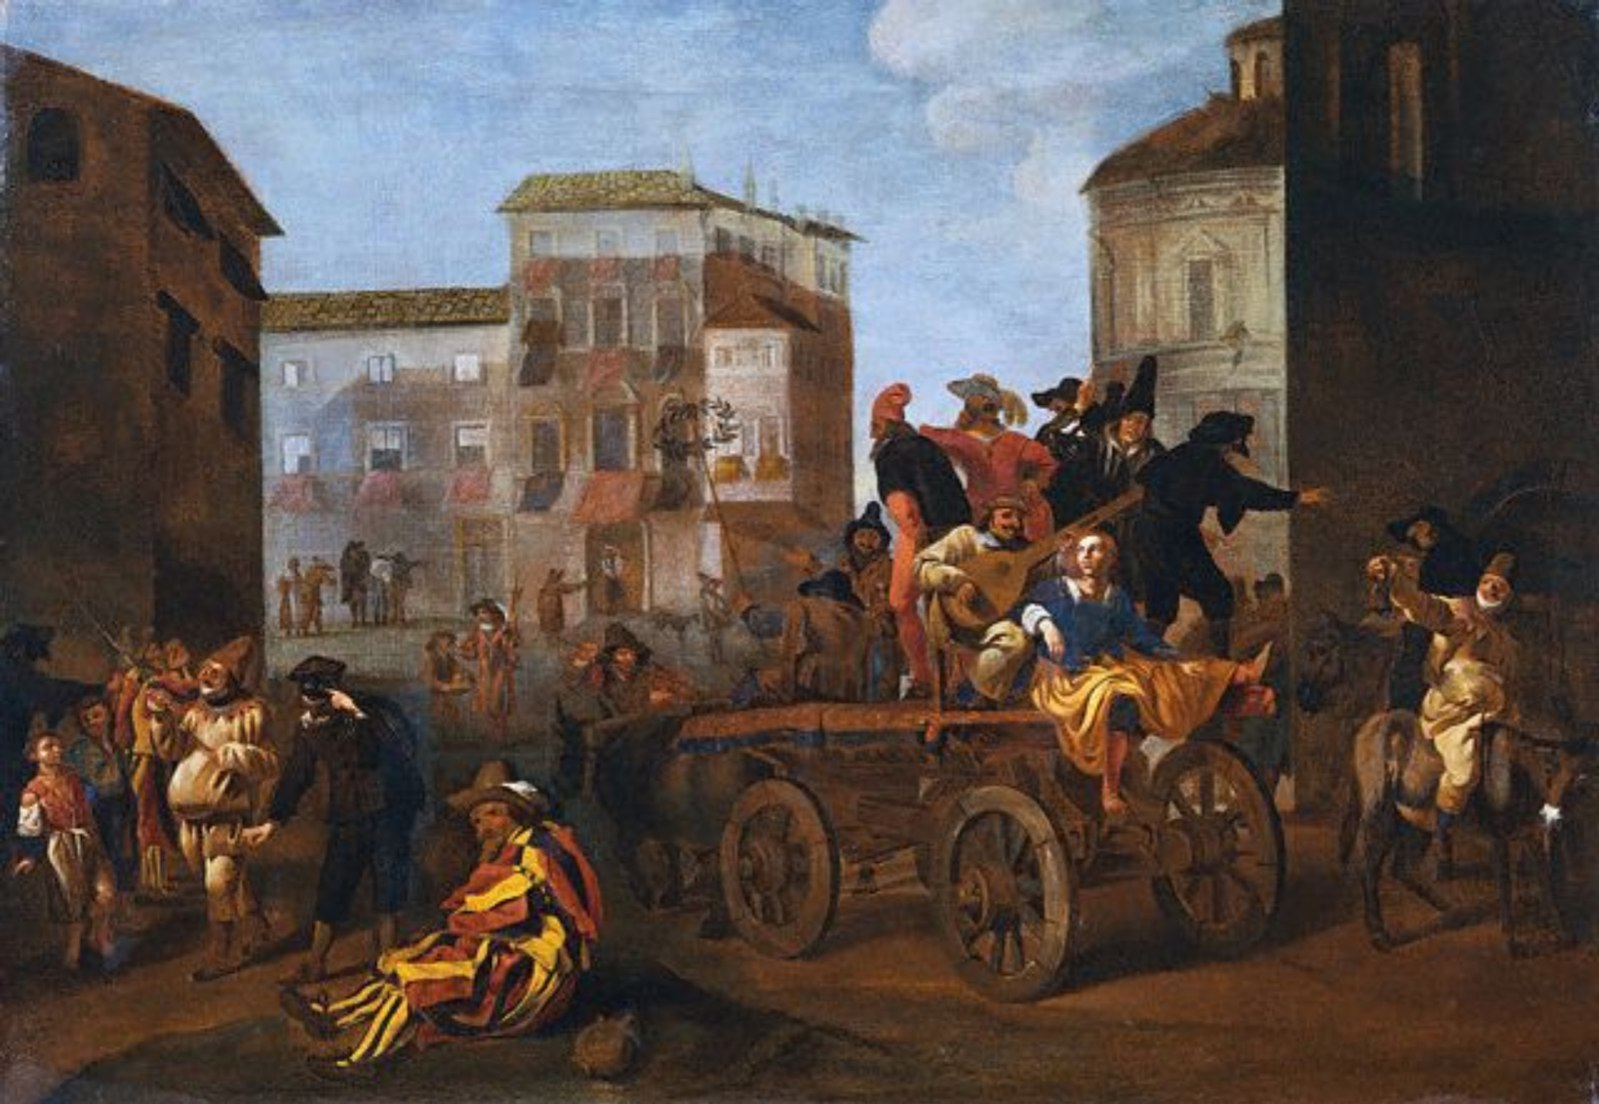 History of Venetian Carnival Masks Jan Miel, Commedia dell'arte Troupe on a Wagon in a Town Square, 1640. Wikimedia Commons.